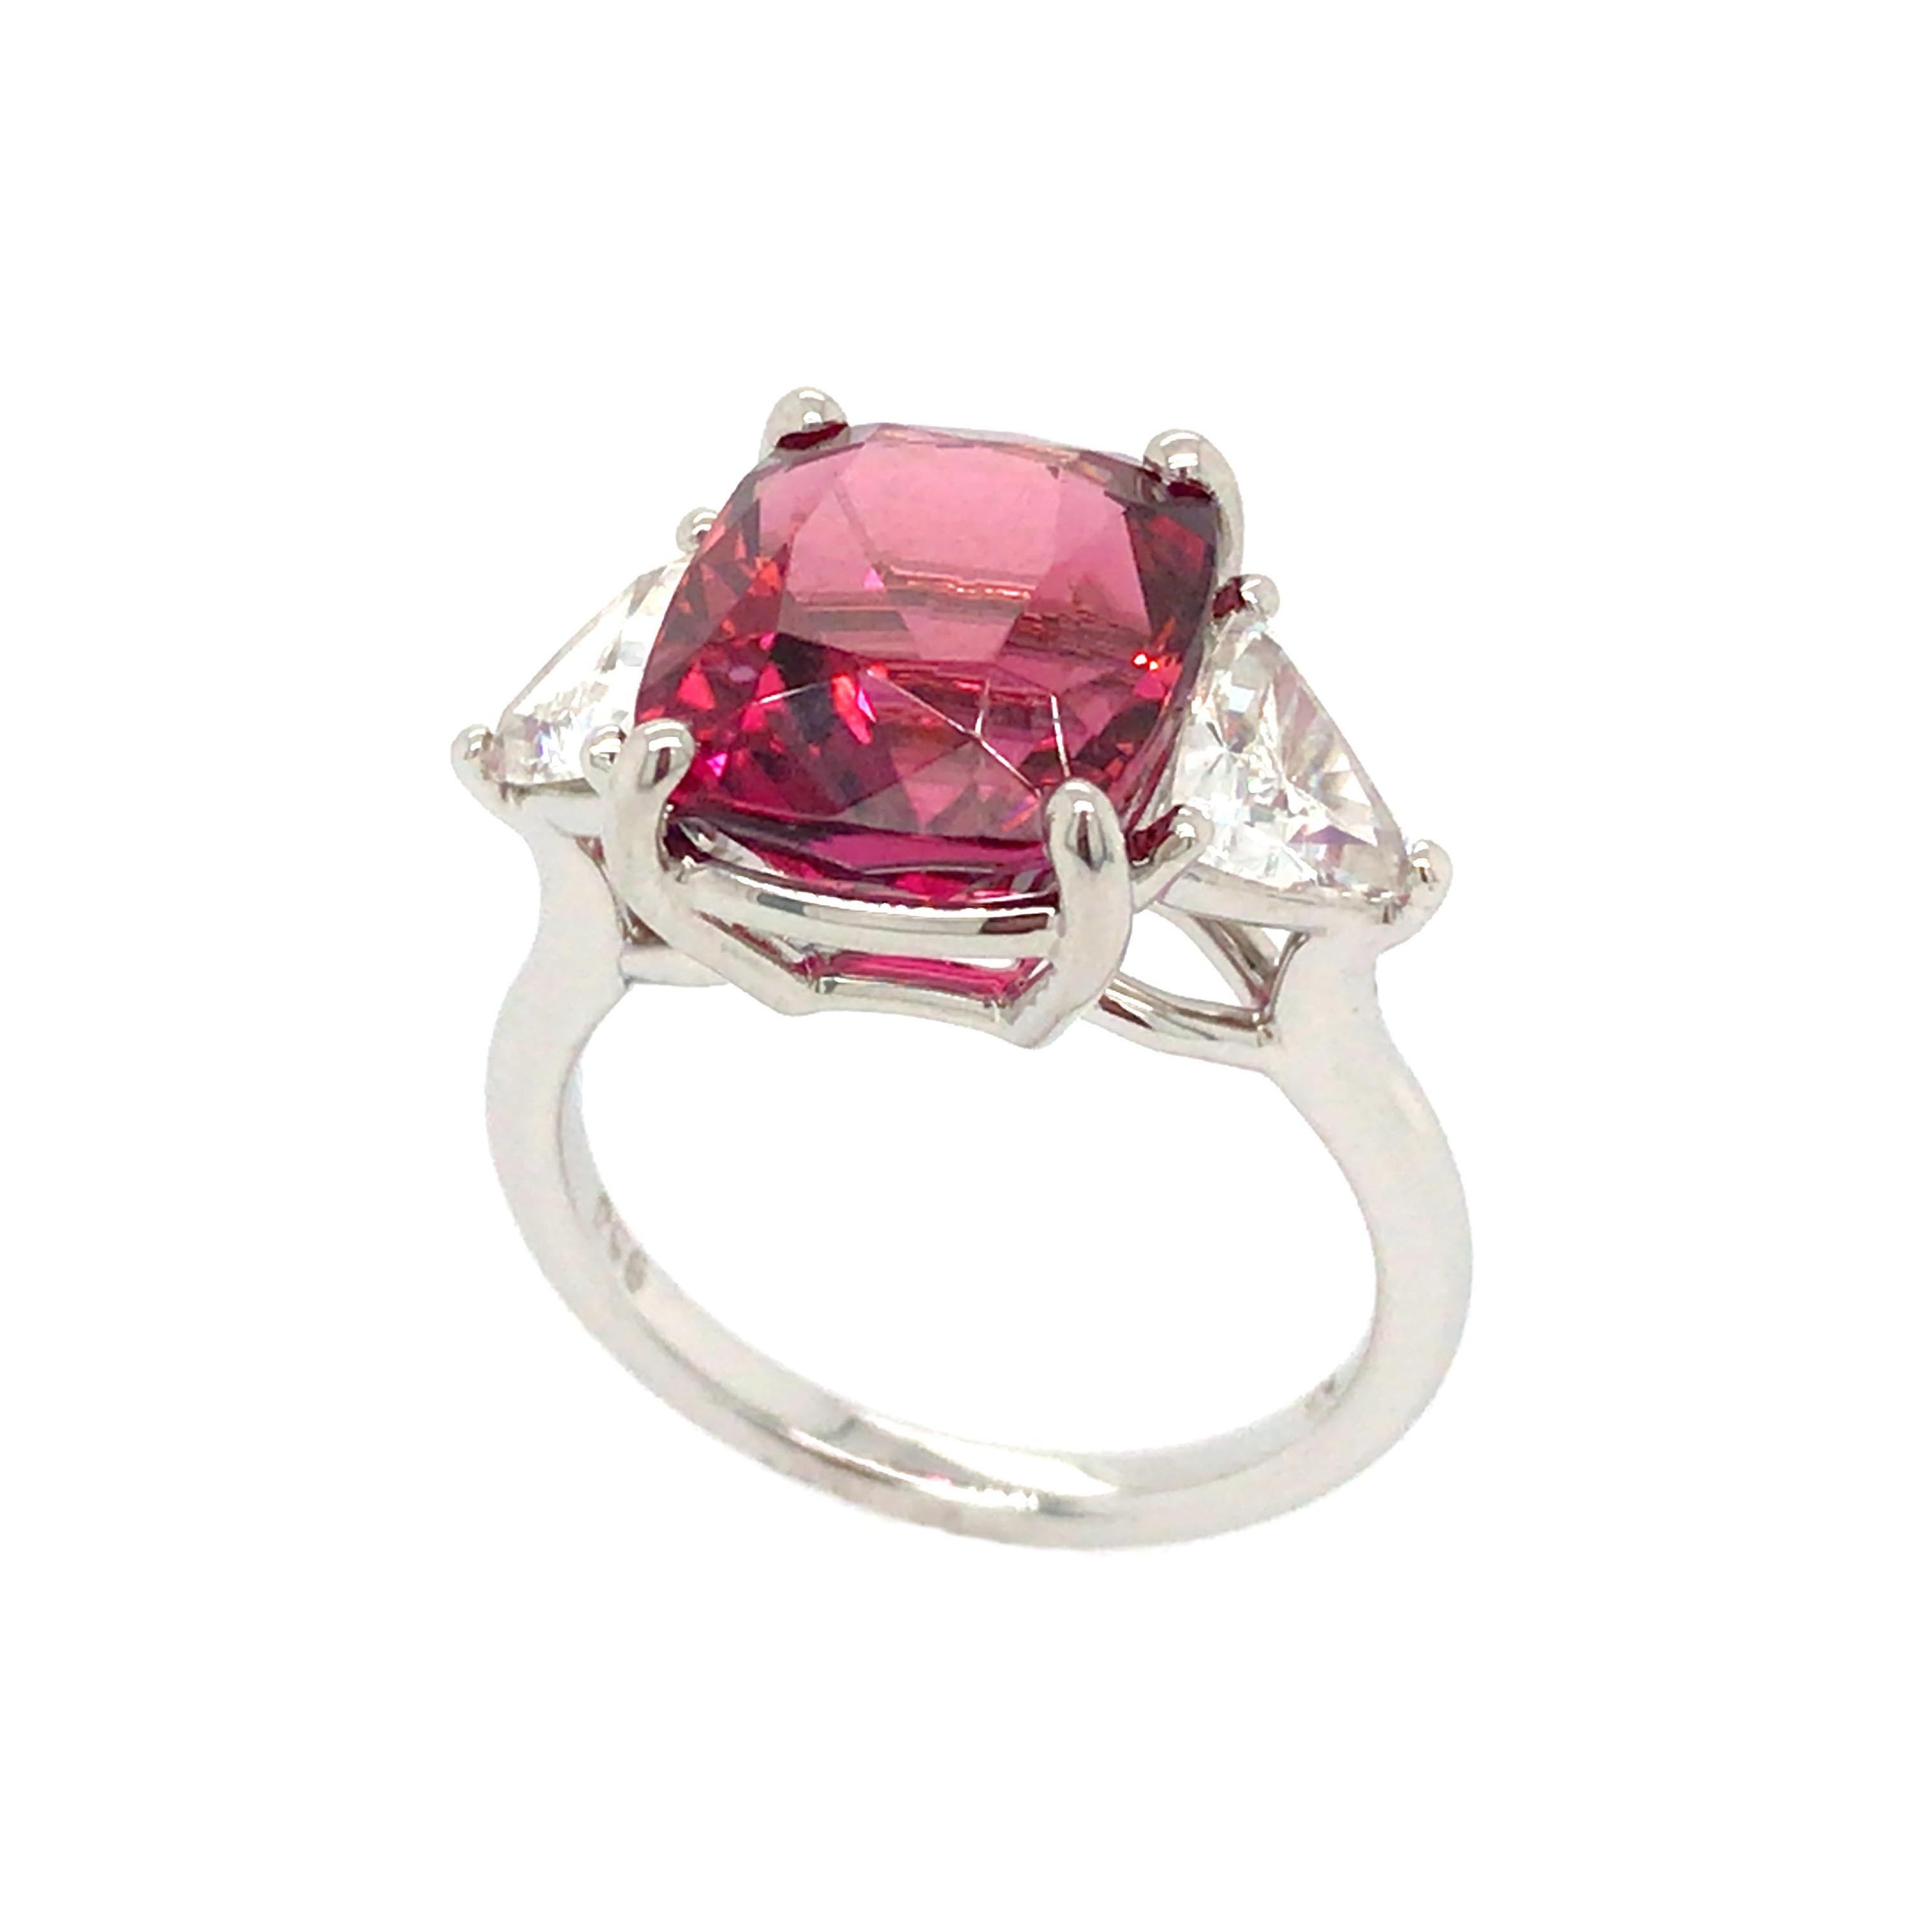 White gold ring set with sparkling Pink Tourmaline. - Louise Shaw Jewellery